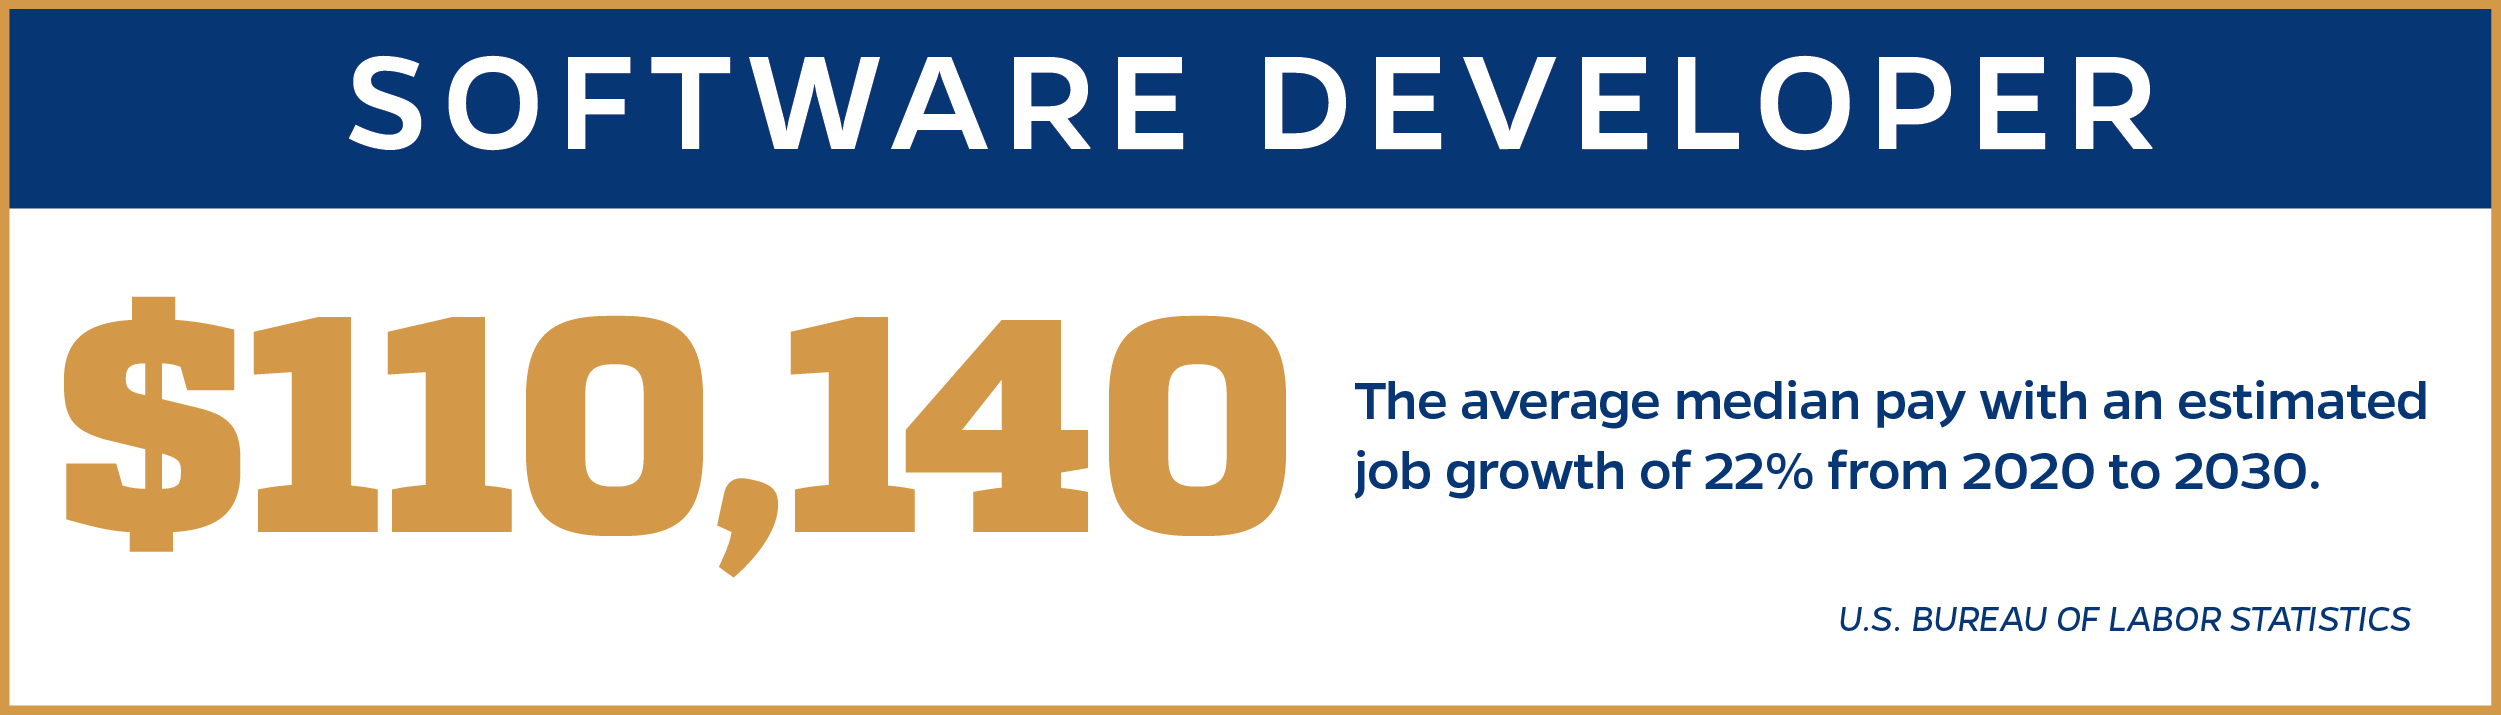 software developer infographic-$110,140 the average median pay with an estimated job growth of 22% from 2020 to 2030.